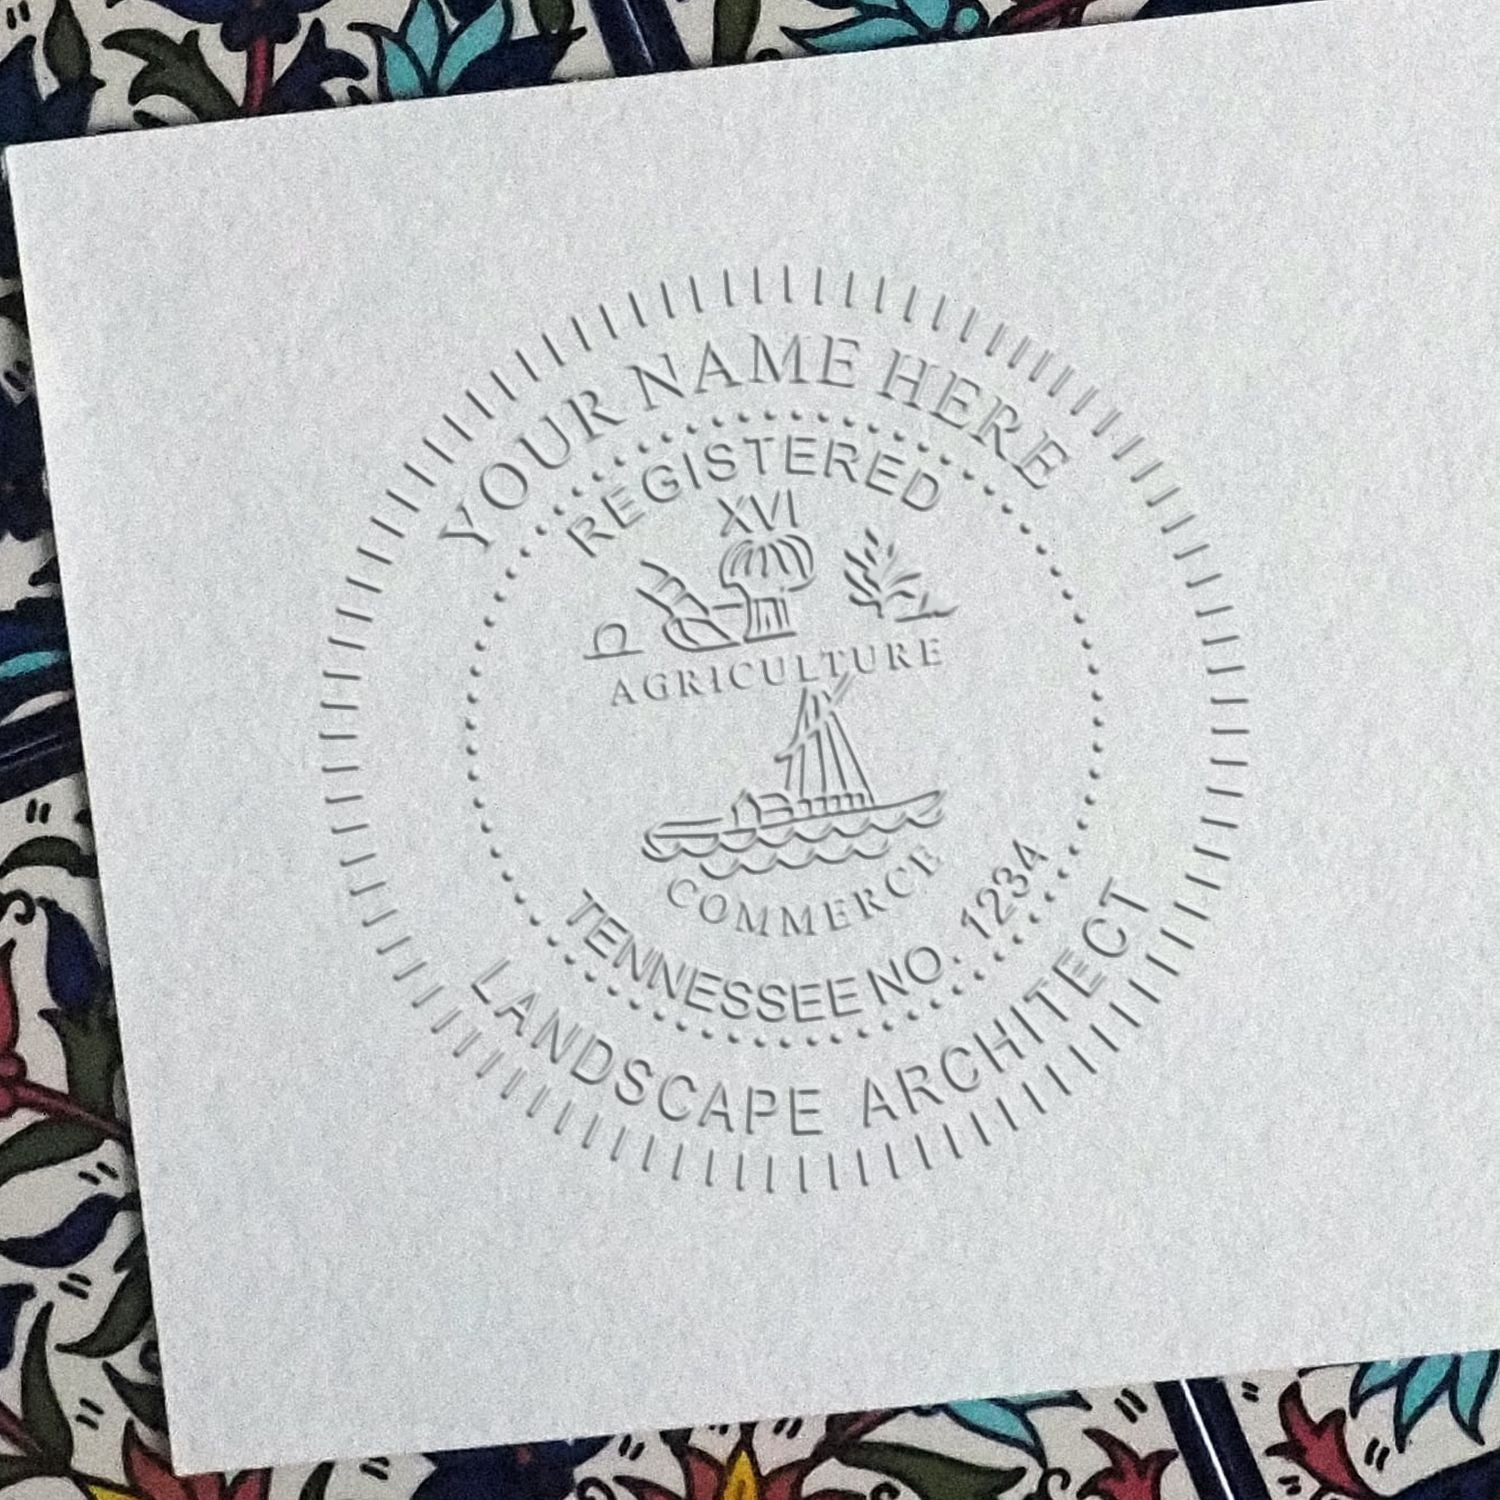 A photograph of the State of Tennessee Handheld Landscape Architect Seal stamp impression reveals a vivid, professional image of the on paper.